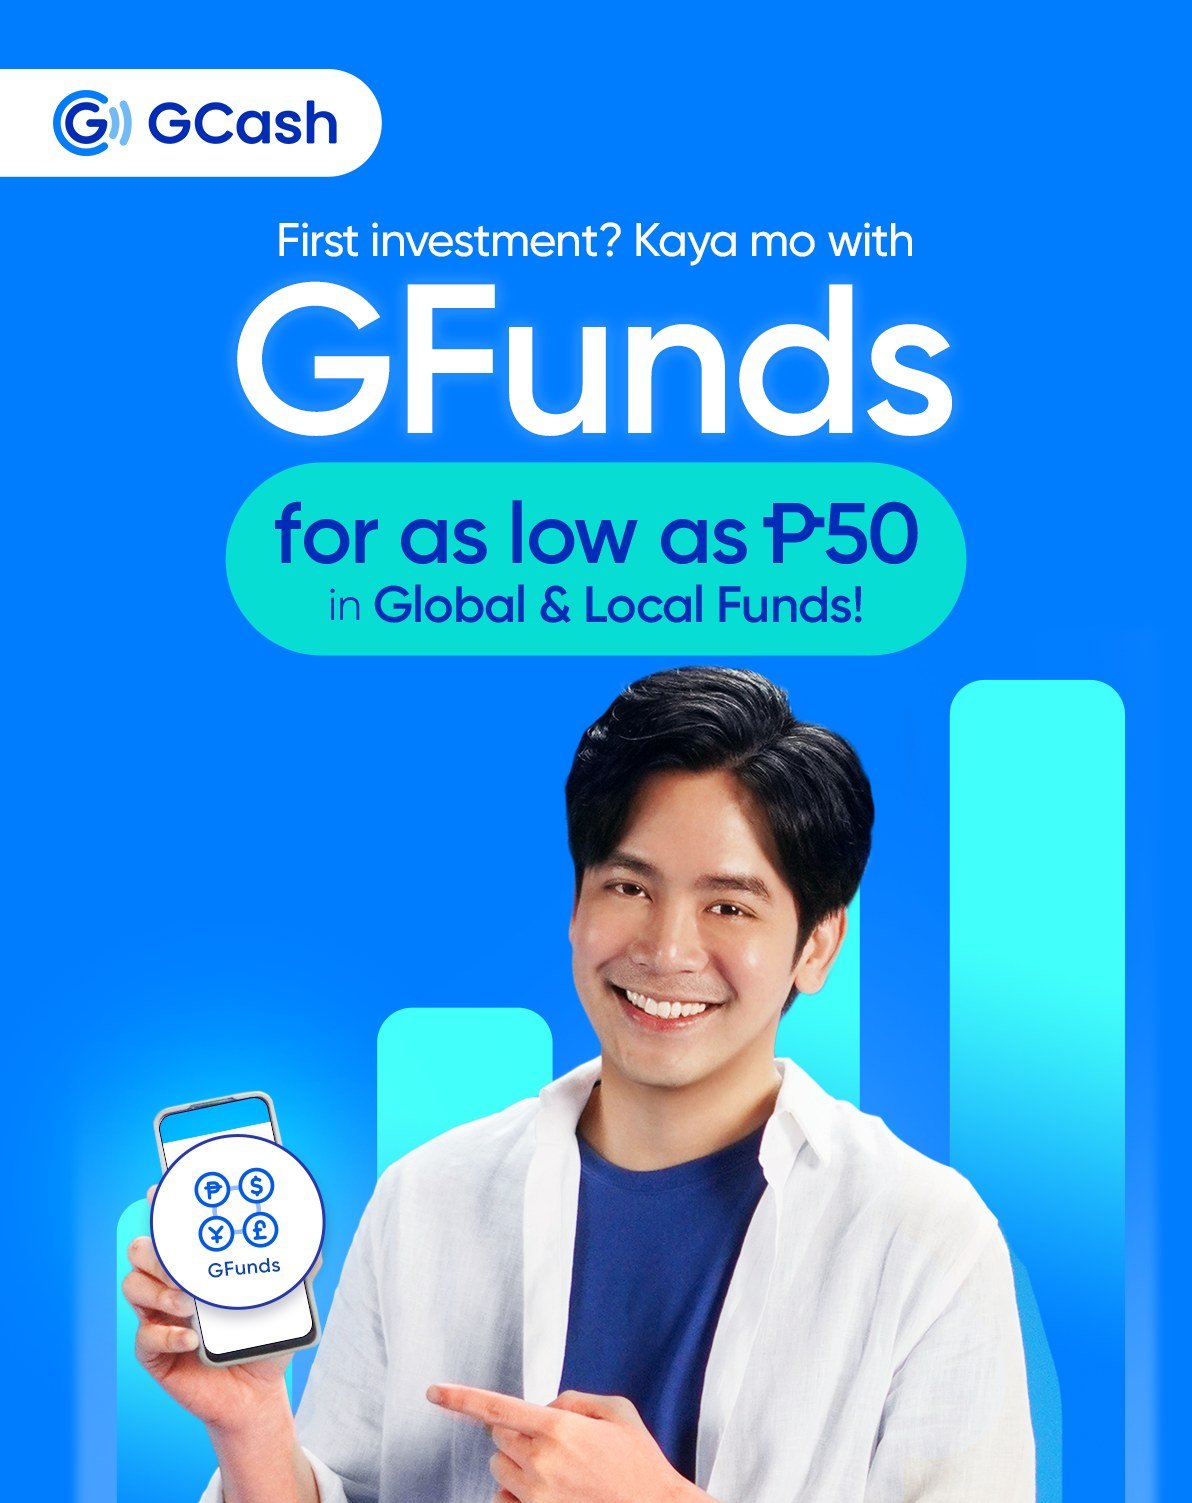 where can i invest my 1000 pesos - gfunds